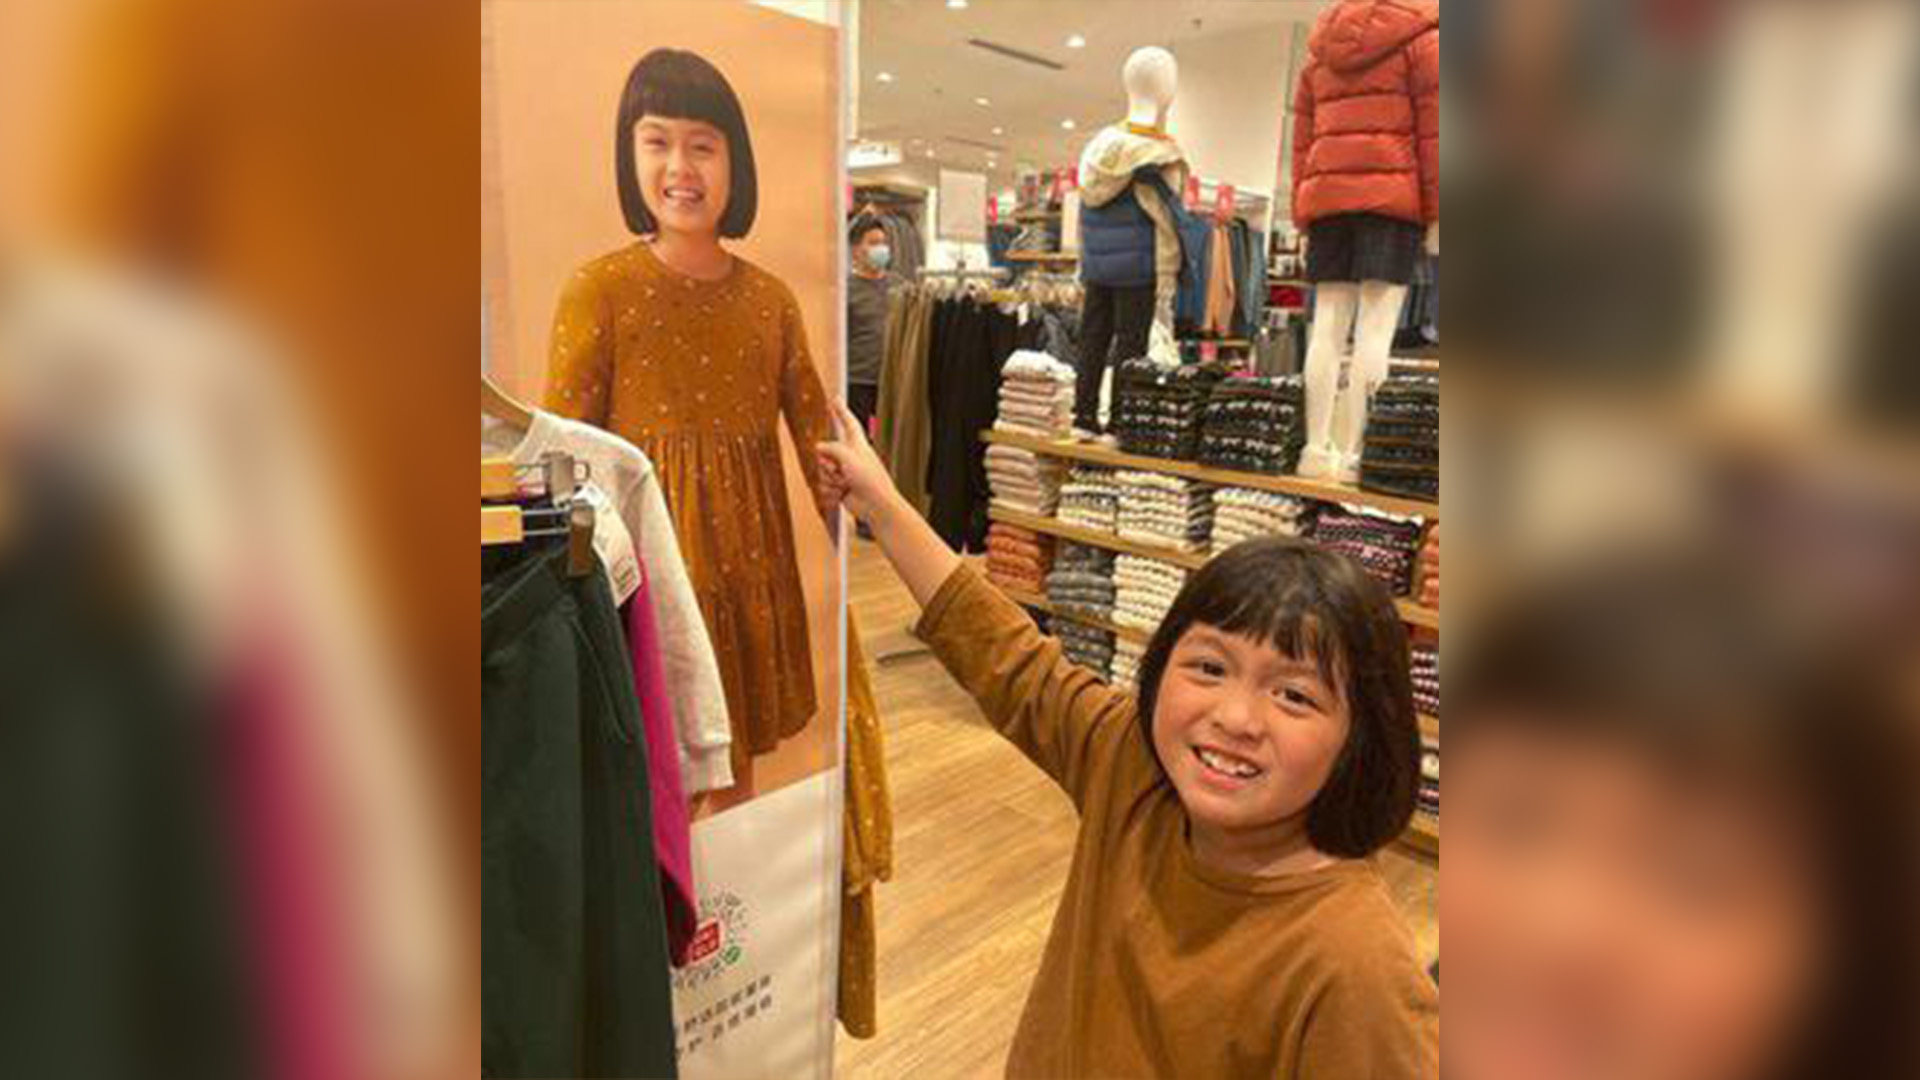 This seven-year-old girl was delighted when she stumbled upon a model that looks a lot like her. Photo: SCMP composite